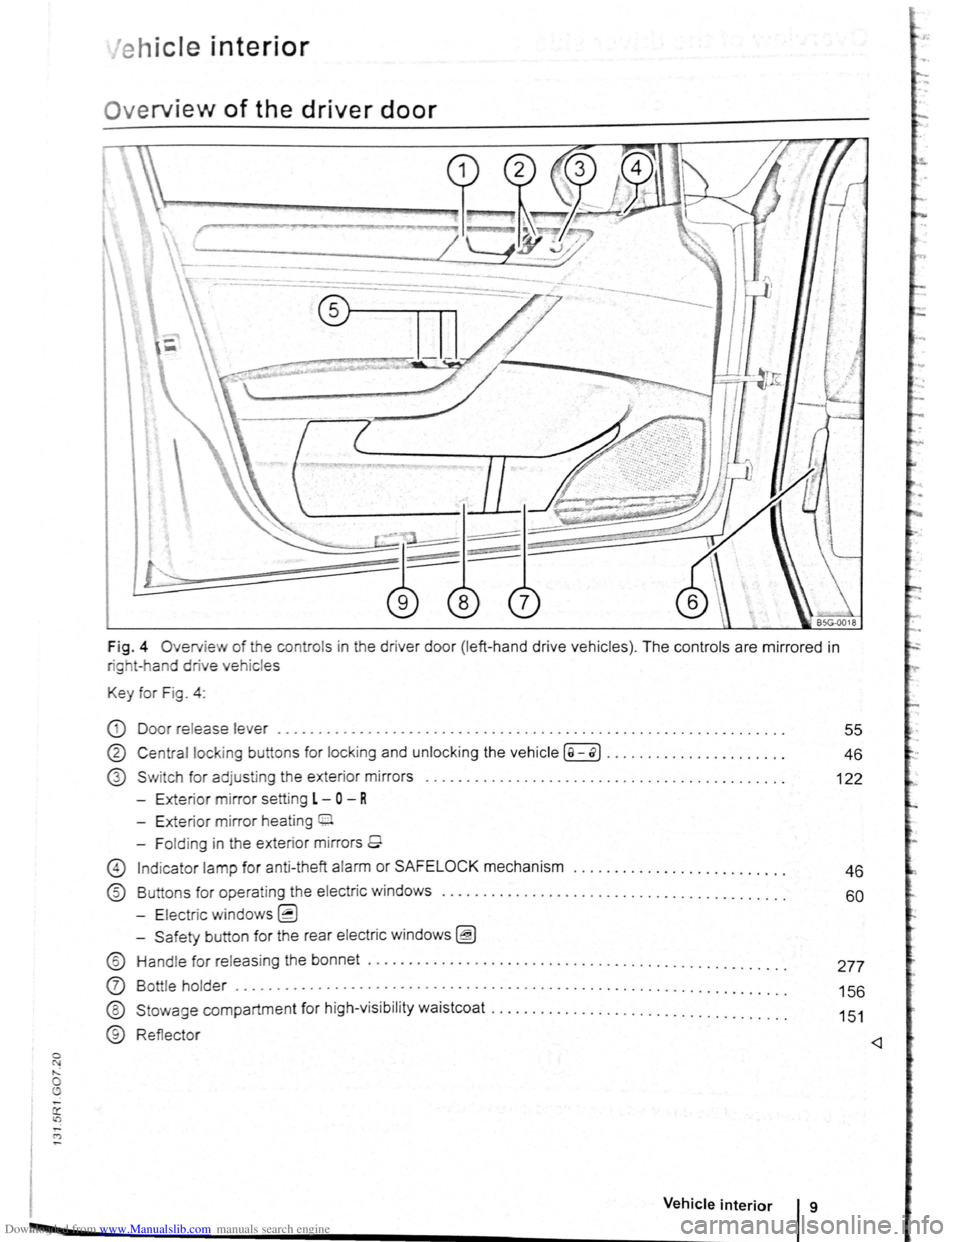 VOLKSWAGEN SCIROCCO 2008  Owners Manual Downloaded from www.Manualslib.com manuals search engine 0 N ,..; 0 
e h ic le interior 
Ov erview of the driver door 
Fig . 4 Overv ie w of the  contro ls  in  the drive r doo r (left -ha nd  dr ive